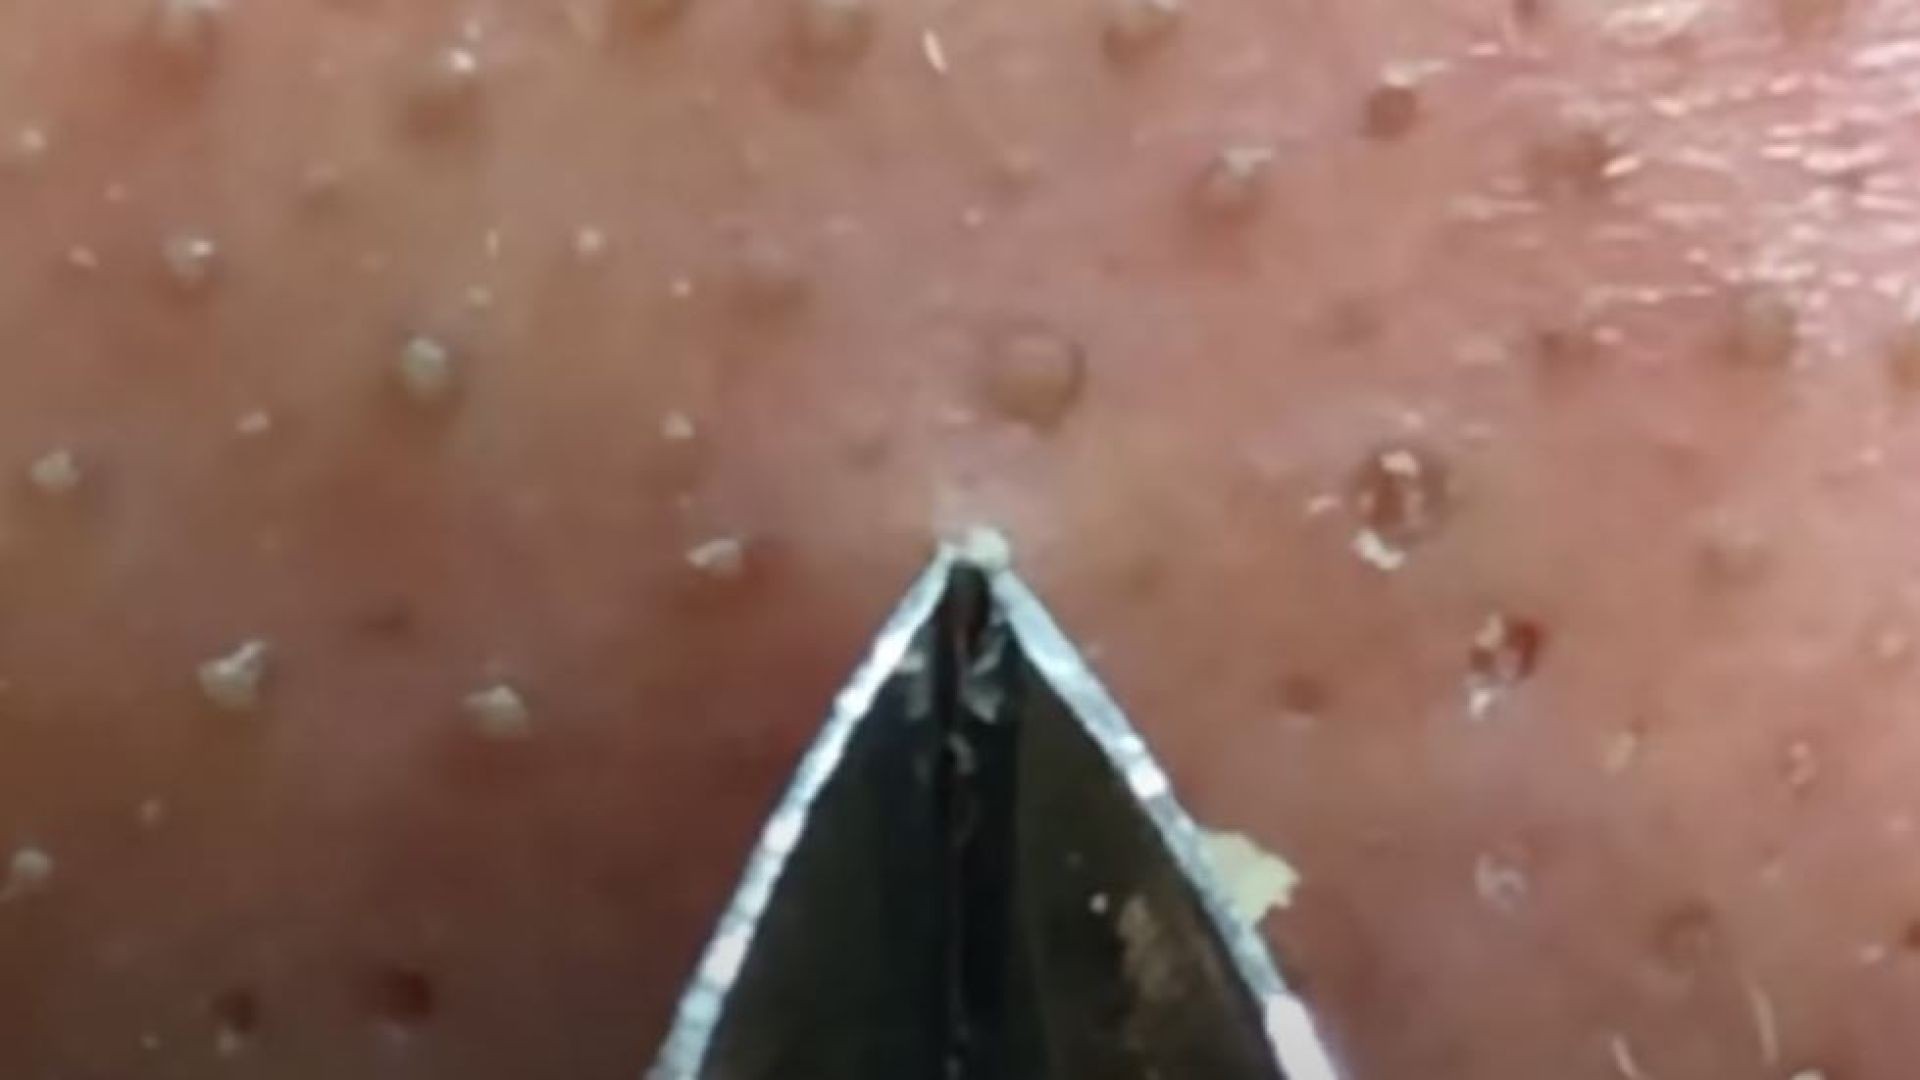 Make Your Day Satisfying with An Popping New Videos #08